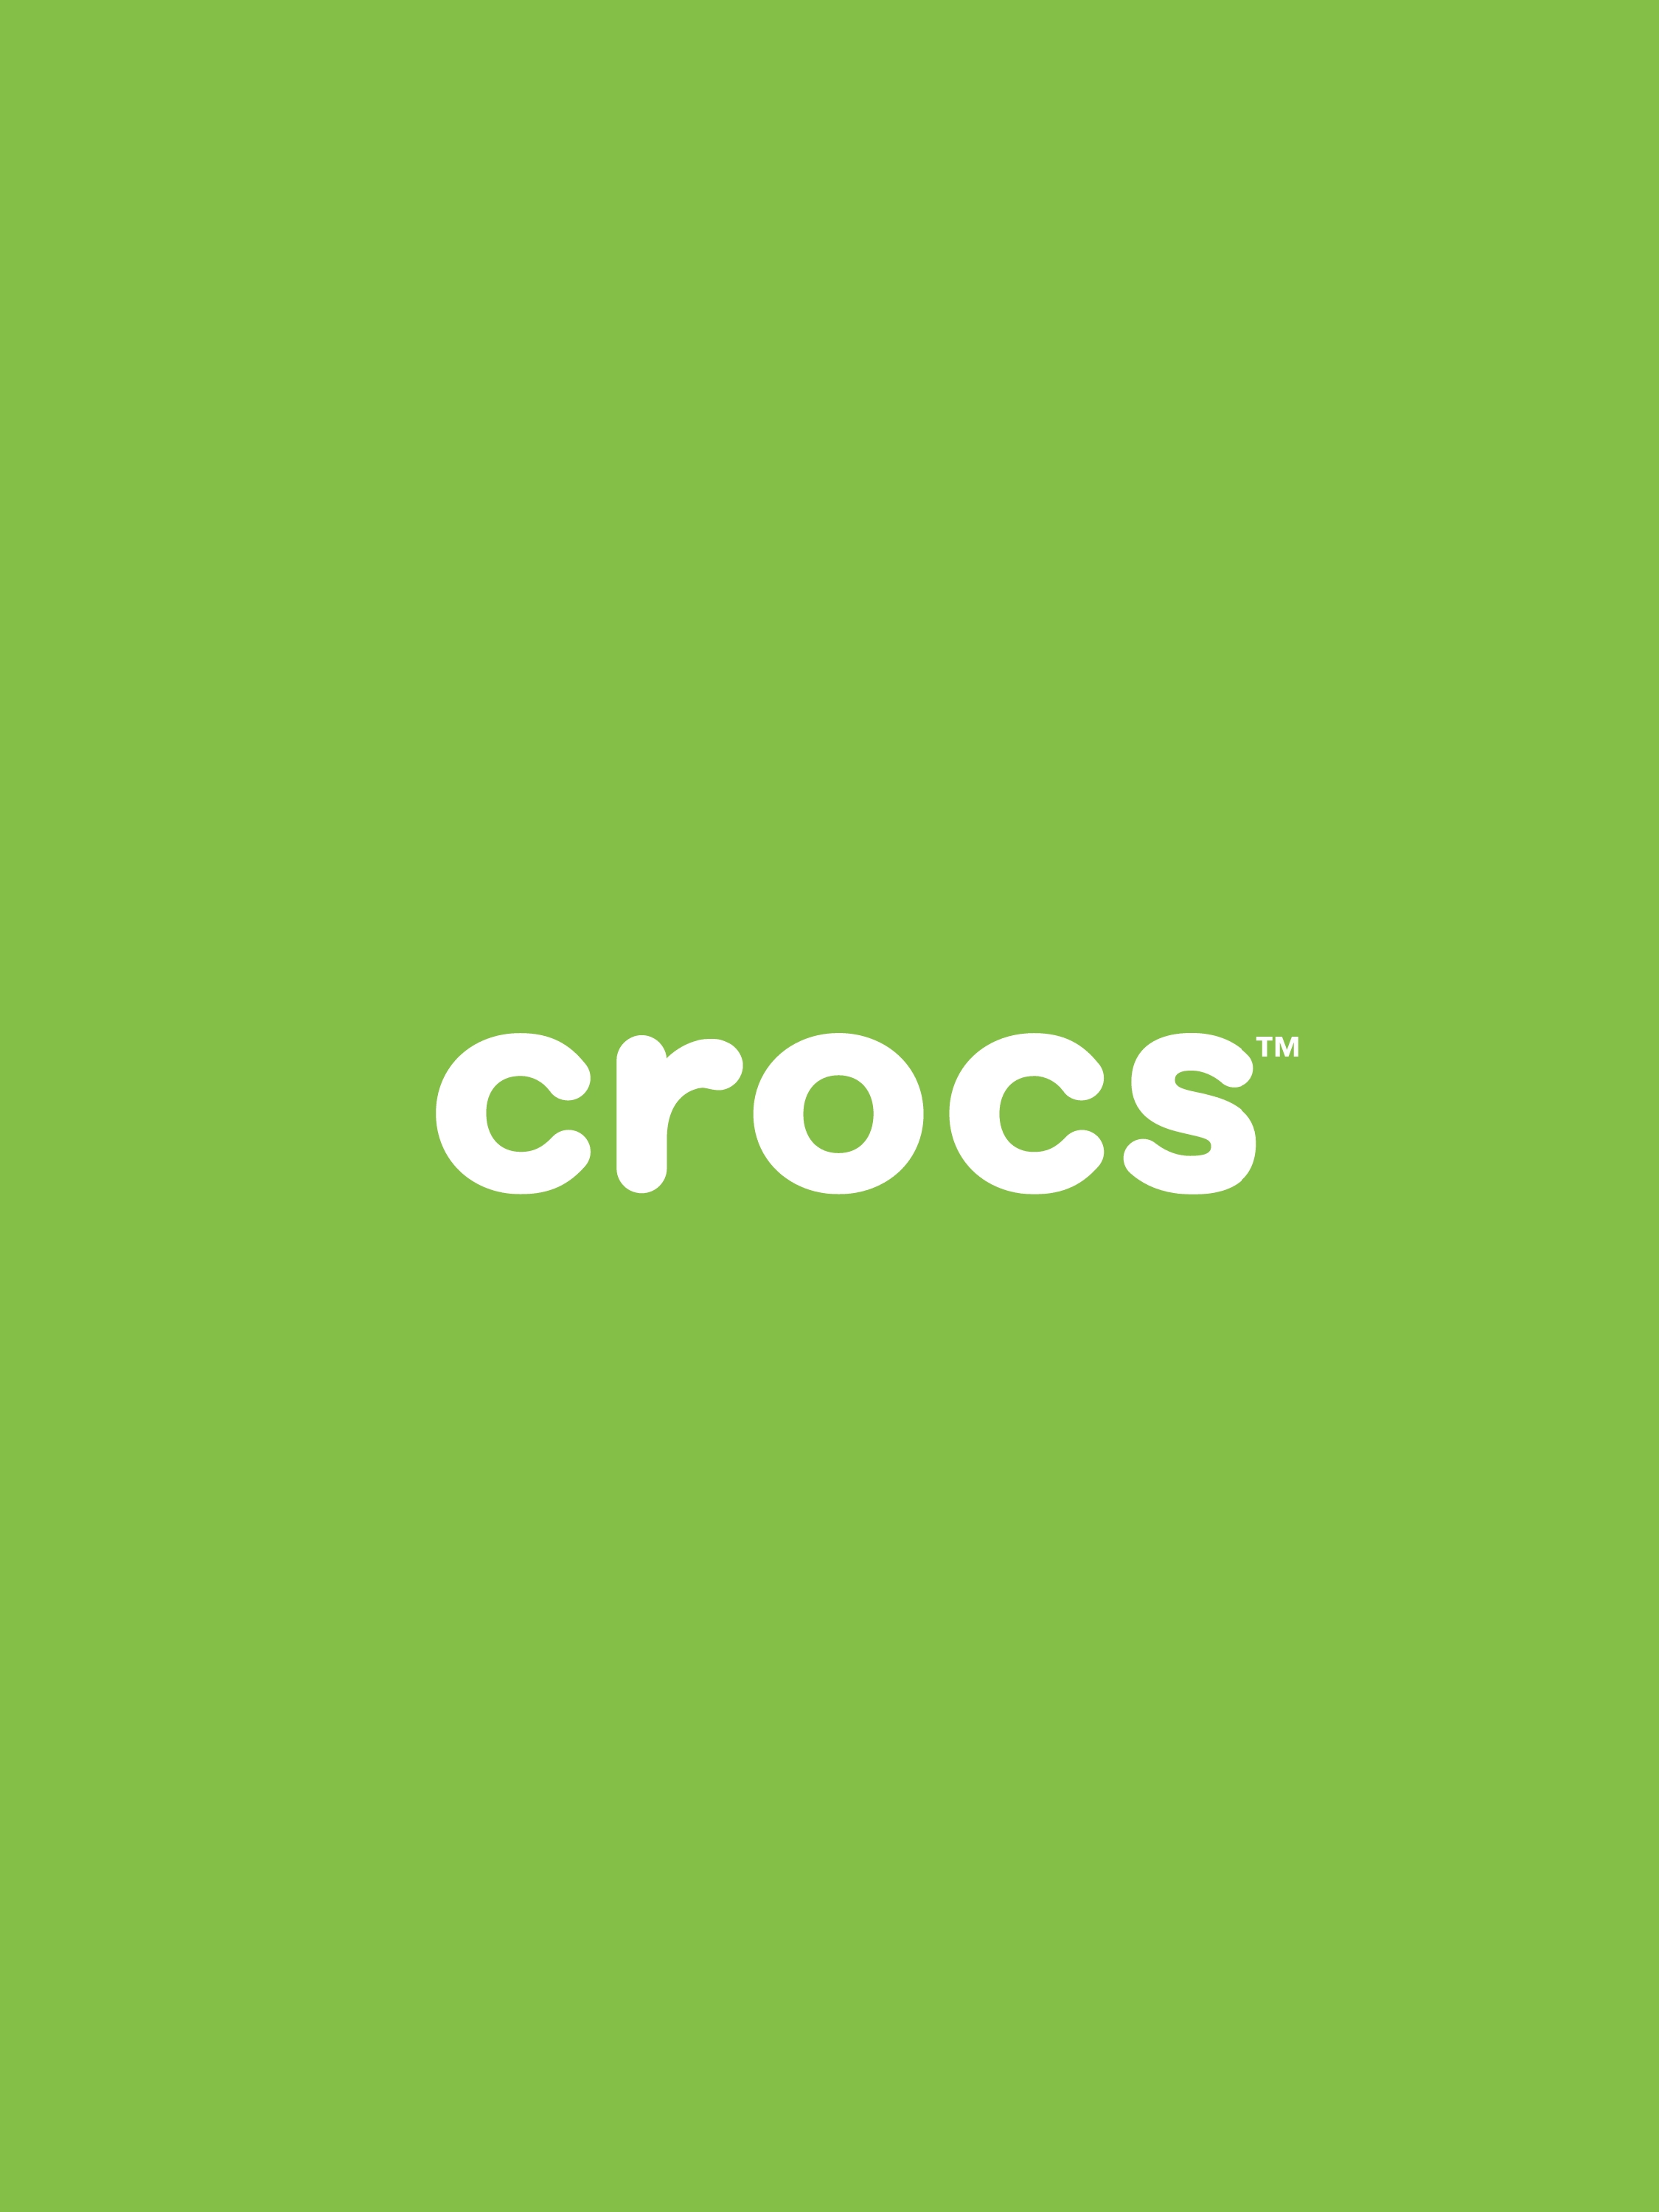 Supercharging growth and cultural relevance with Crocs